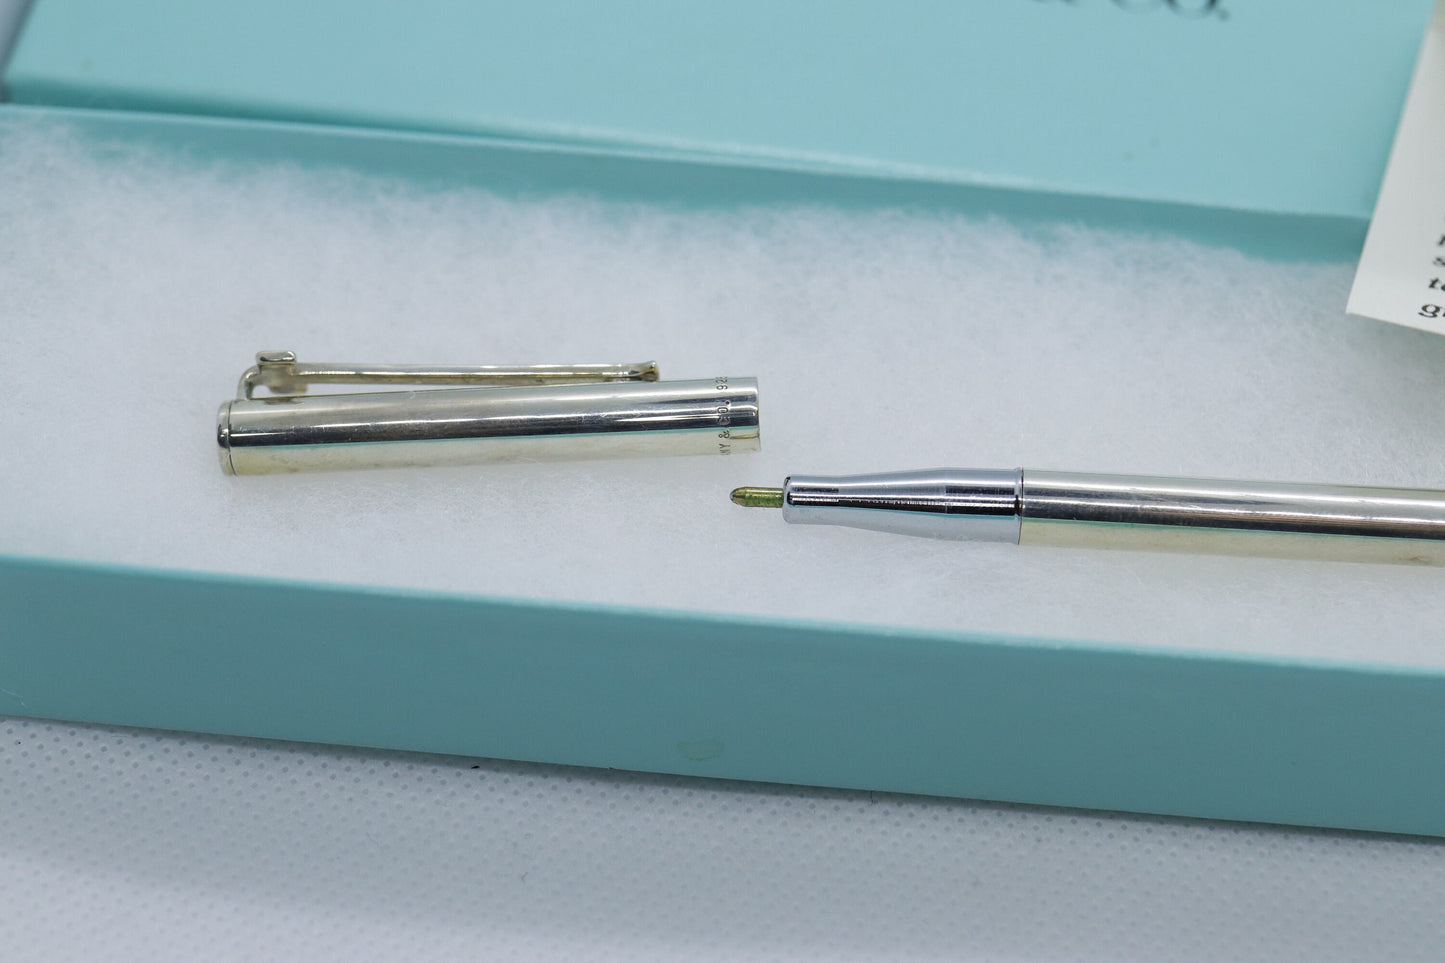 Tiffany and Co. PEN Sterling Silver T Clip Executive PEN